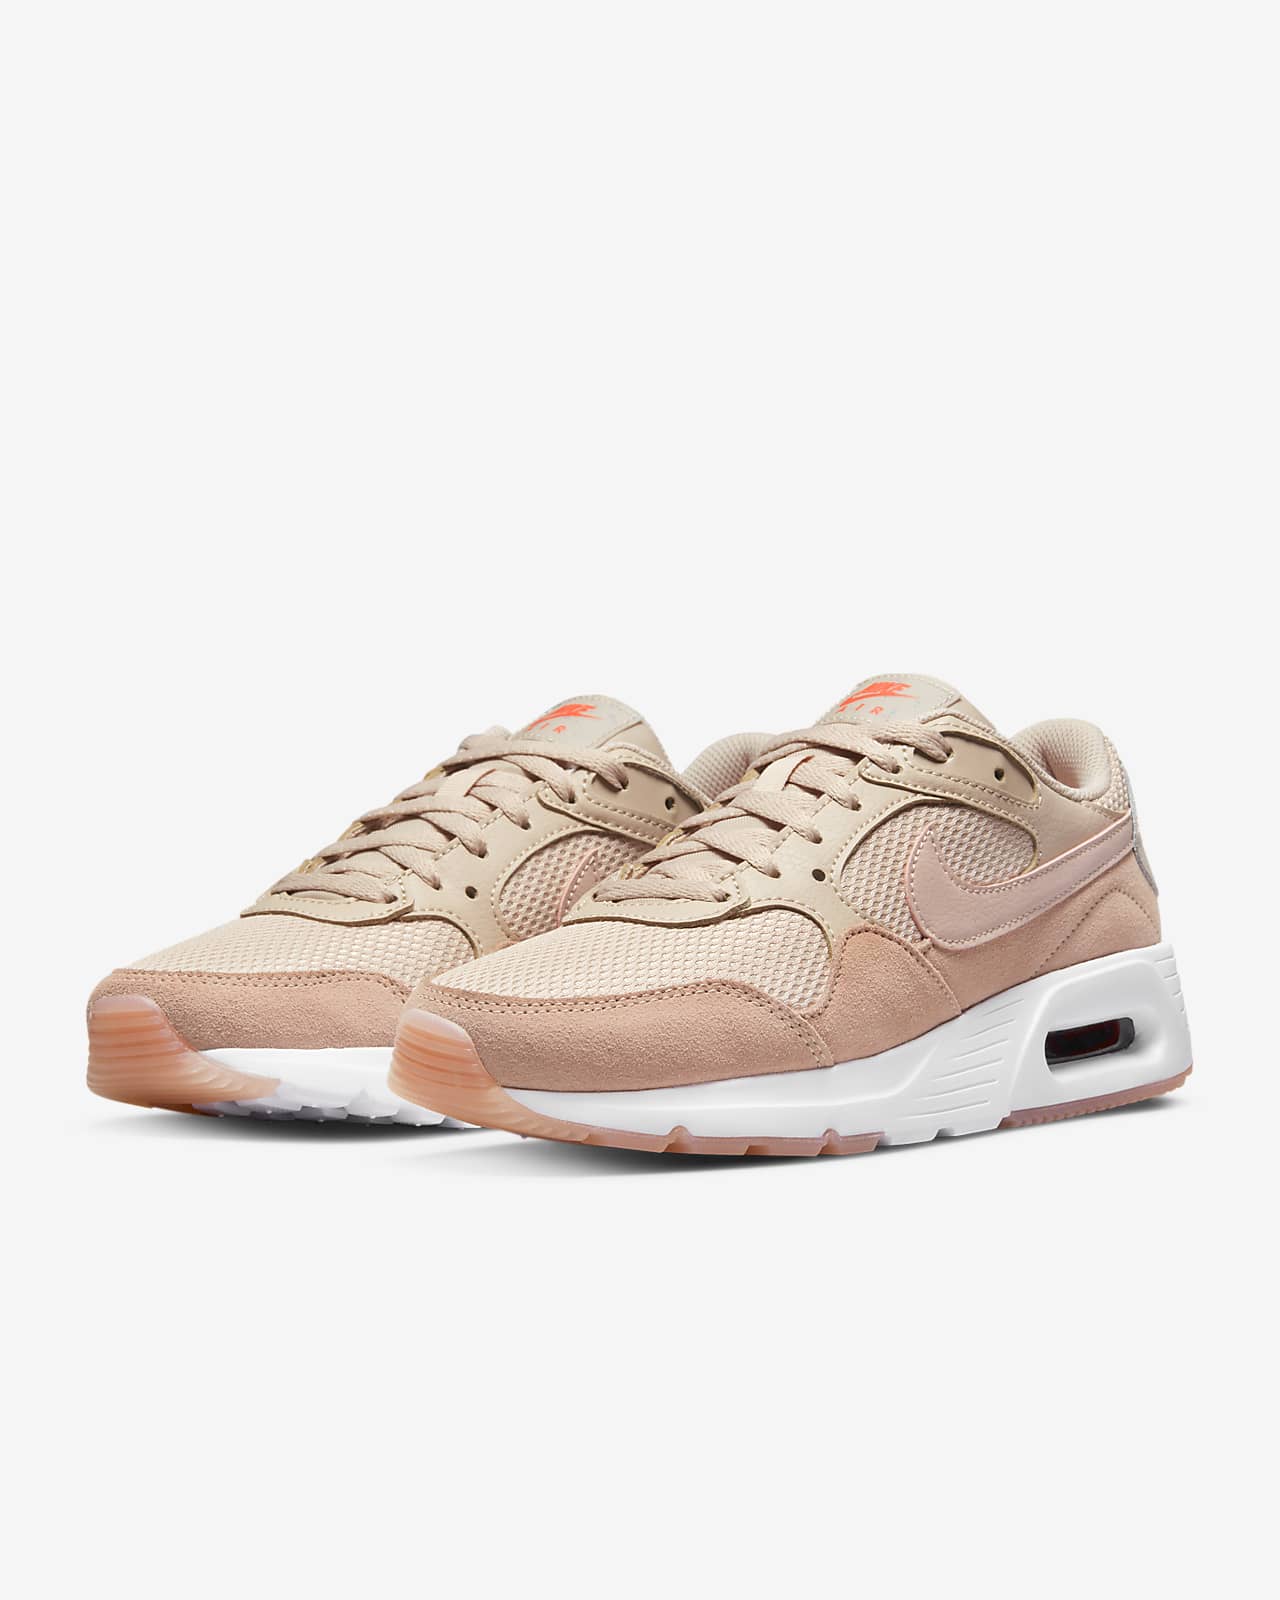 NIKE AIR MAX SC Womens CW4554-201 (Fossil Stone/Pink OXFOR), Size 9.5 